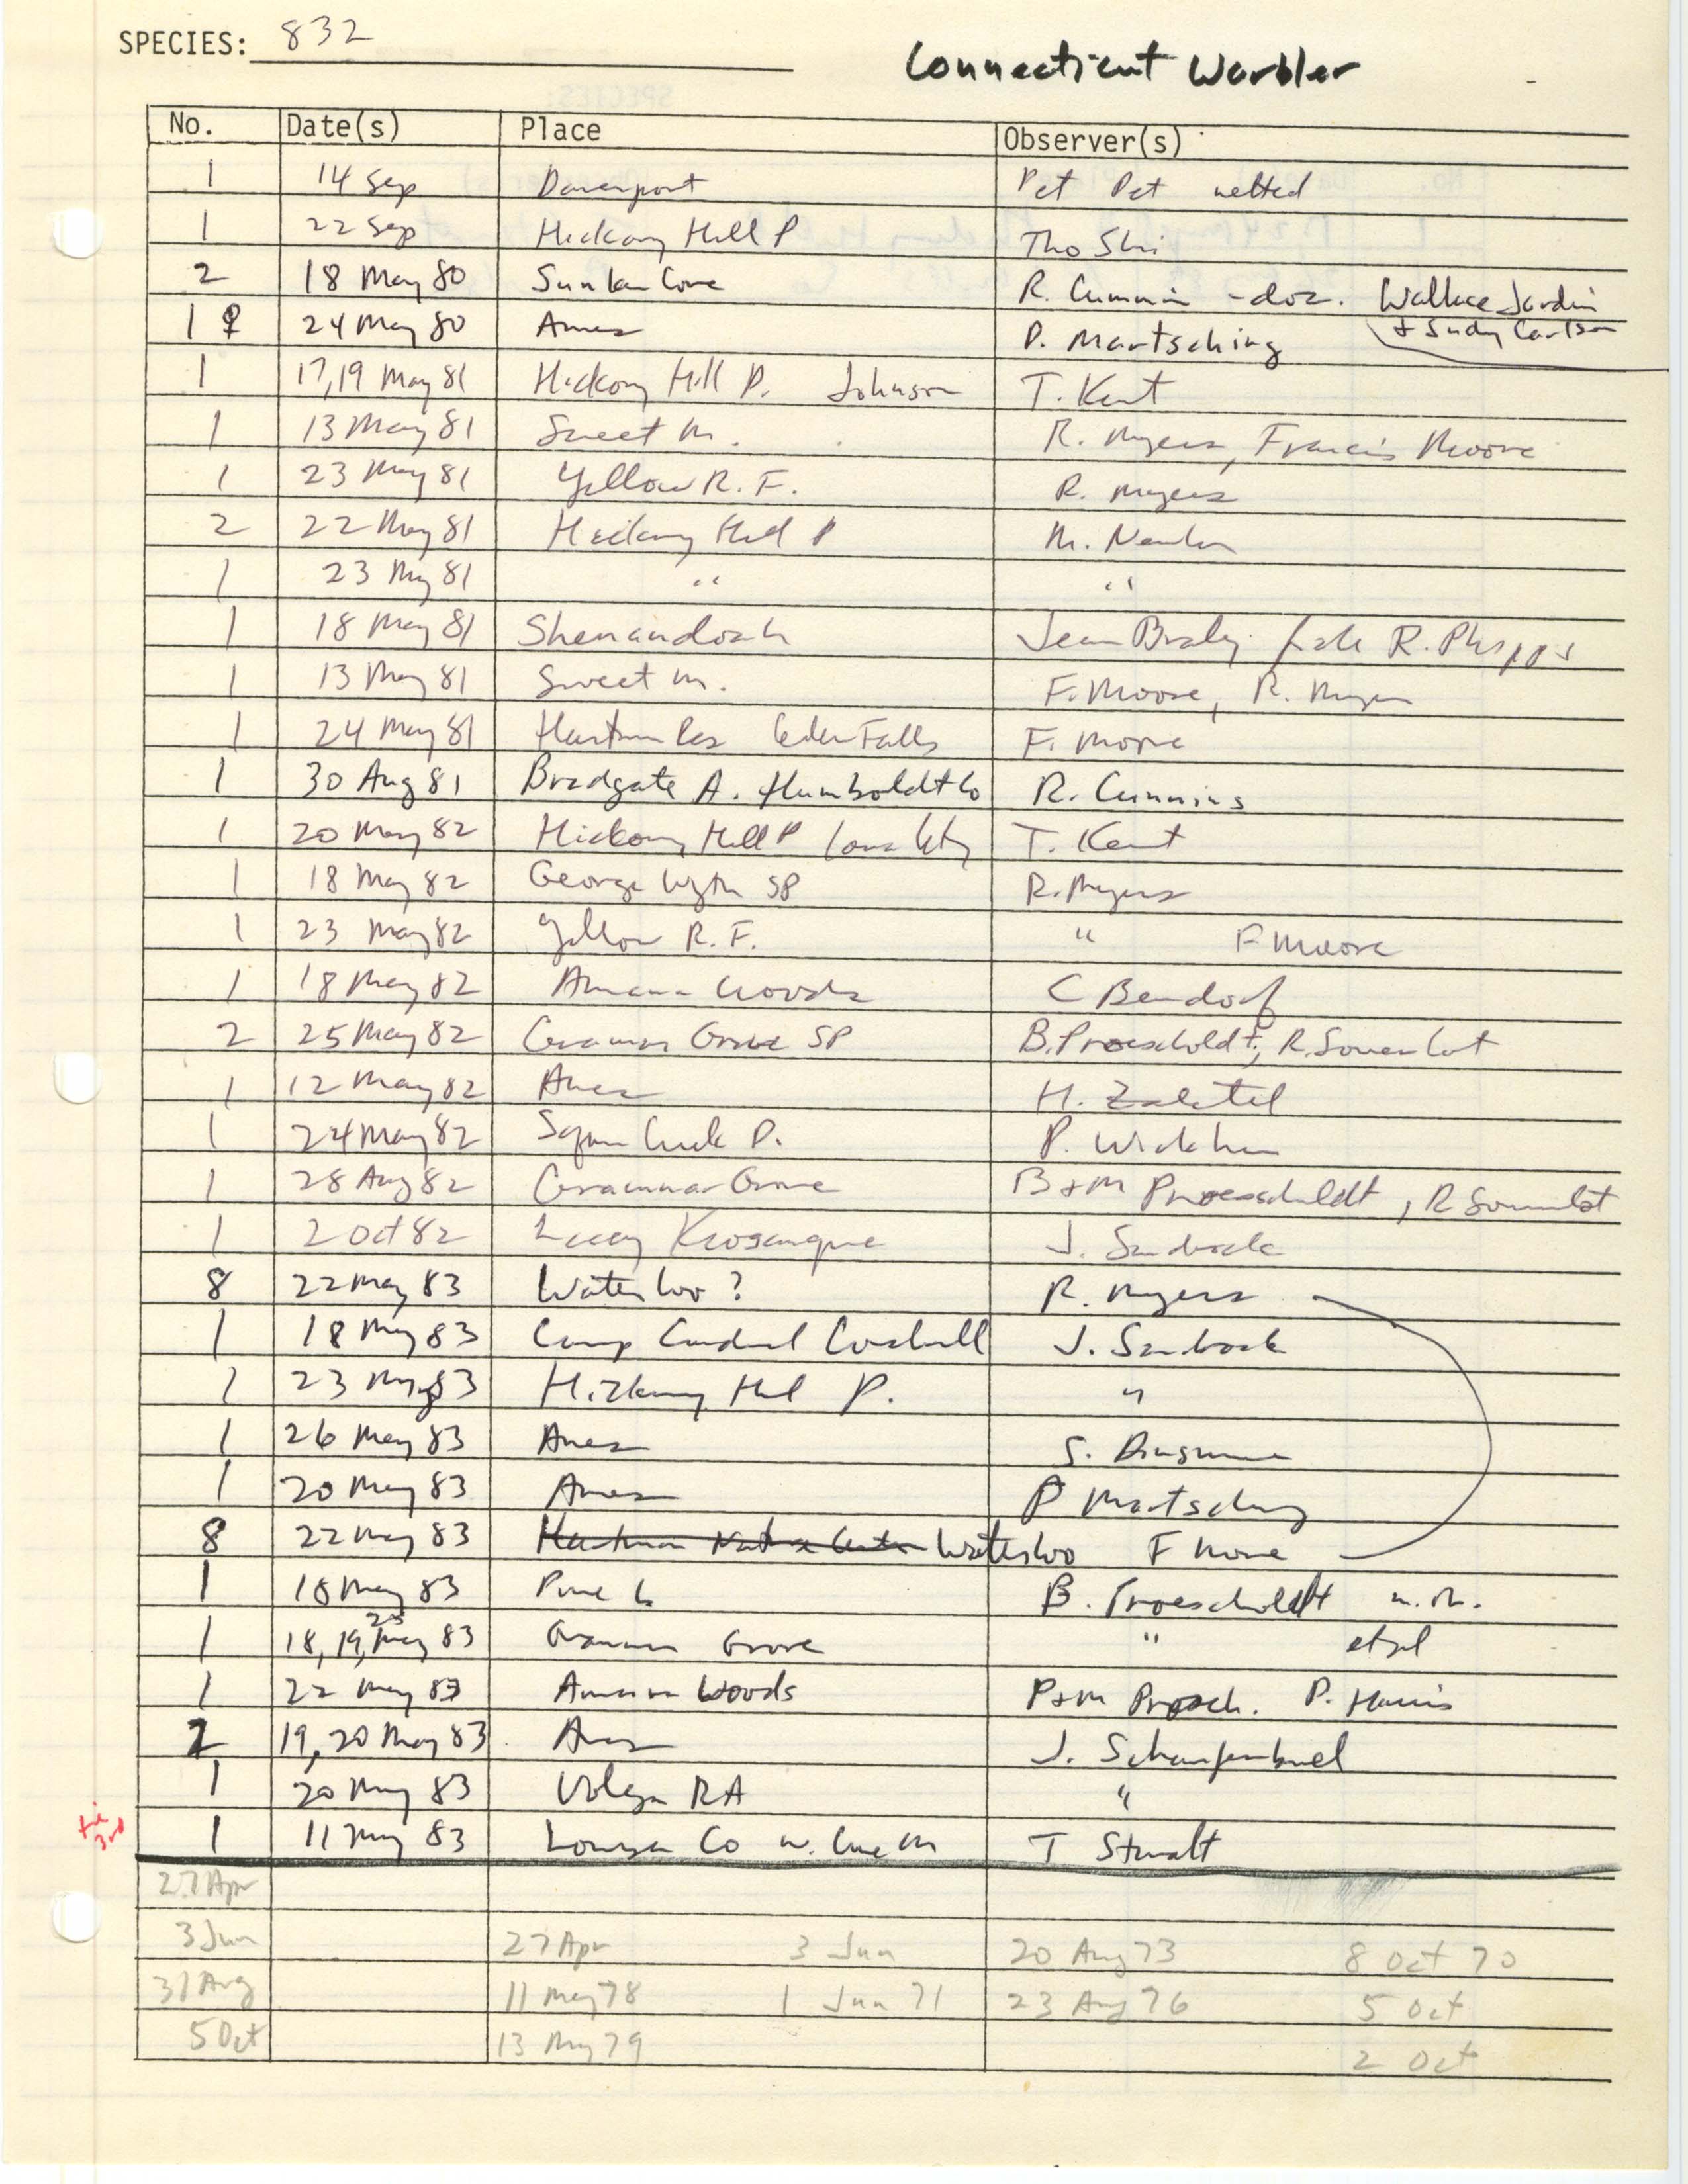 Iowa Ornithologists' Union, field report compiled data, Connecticut Warbler, 1980-1983